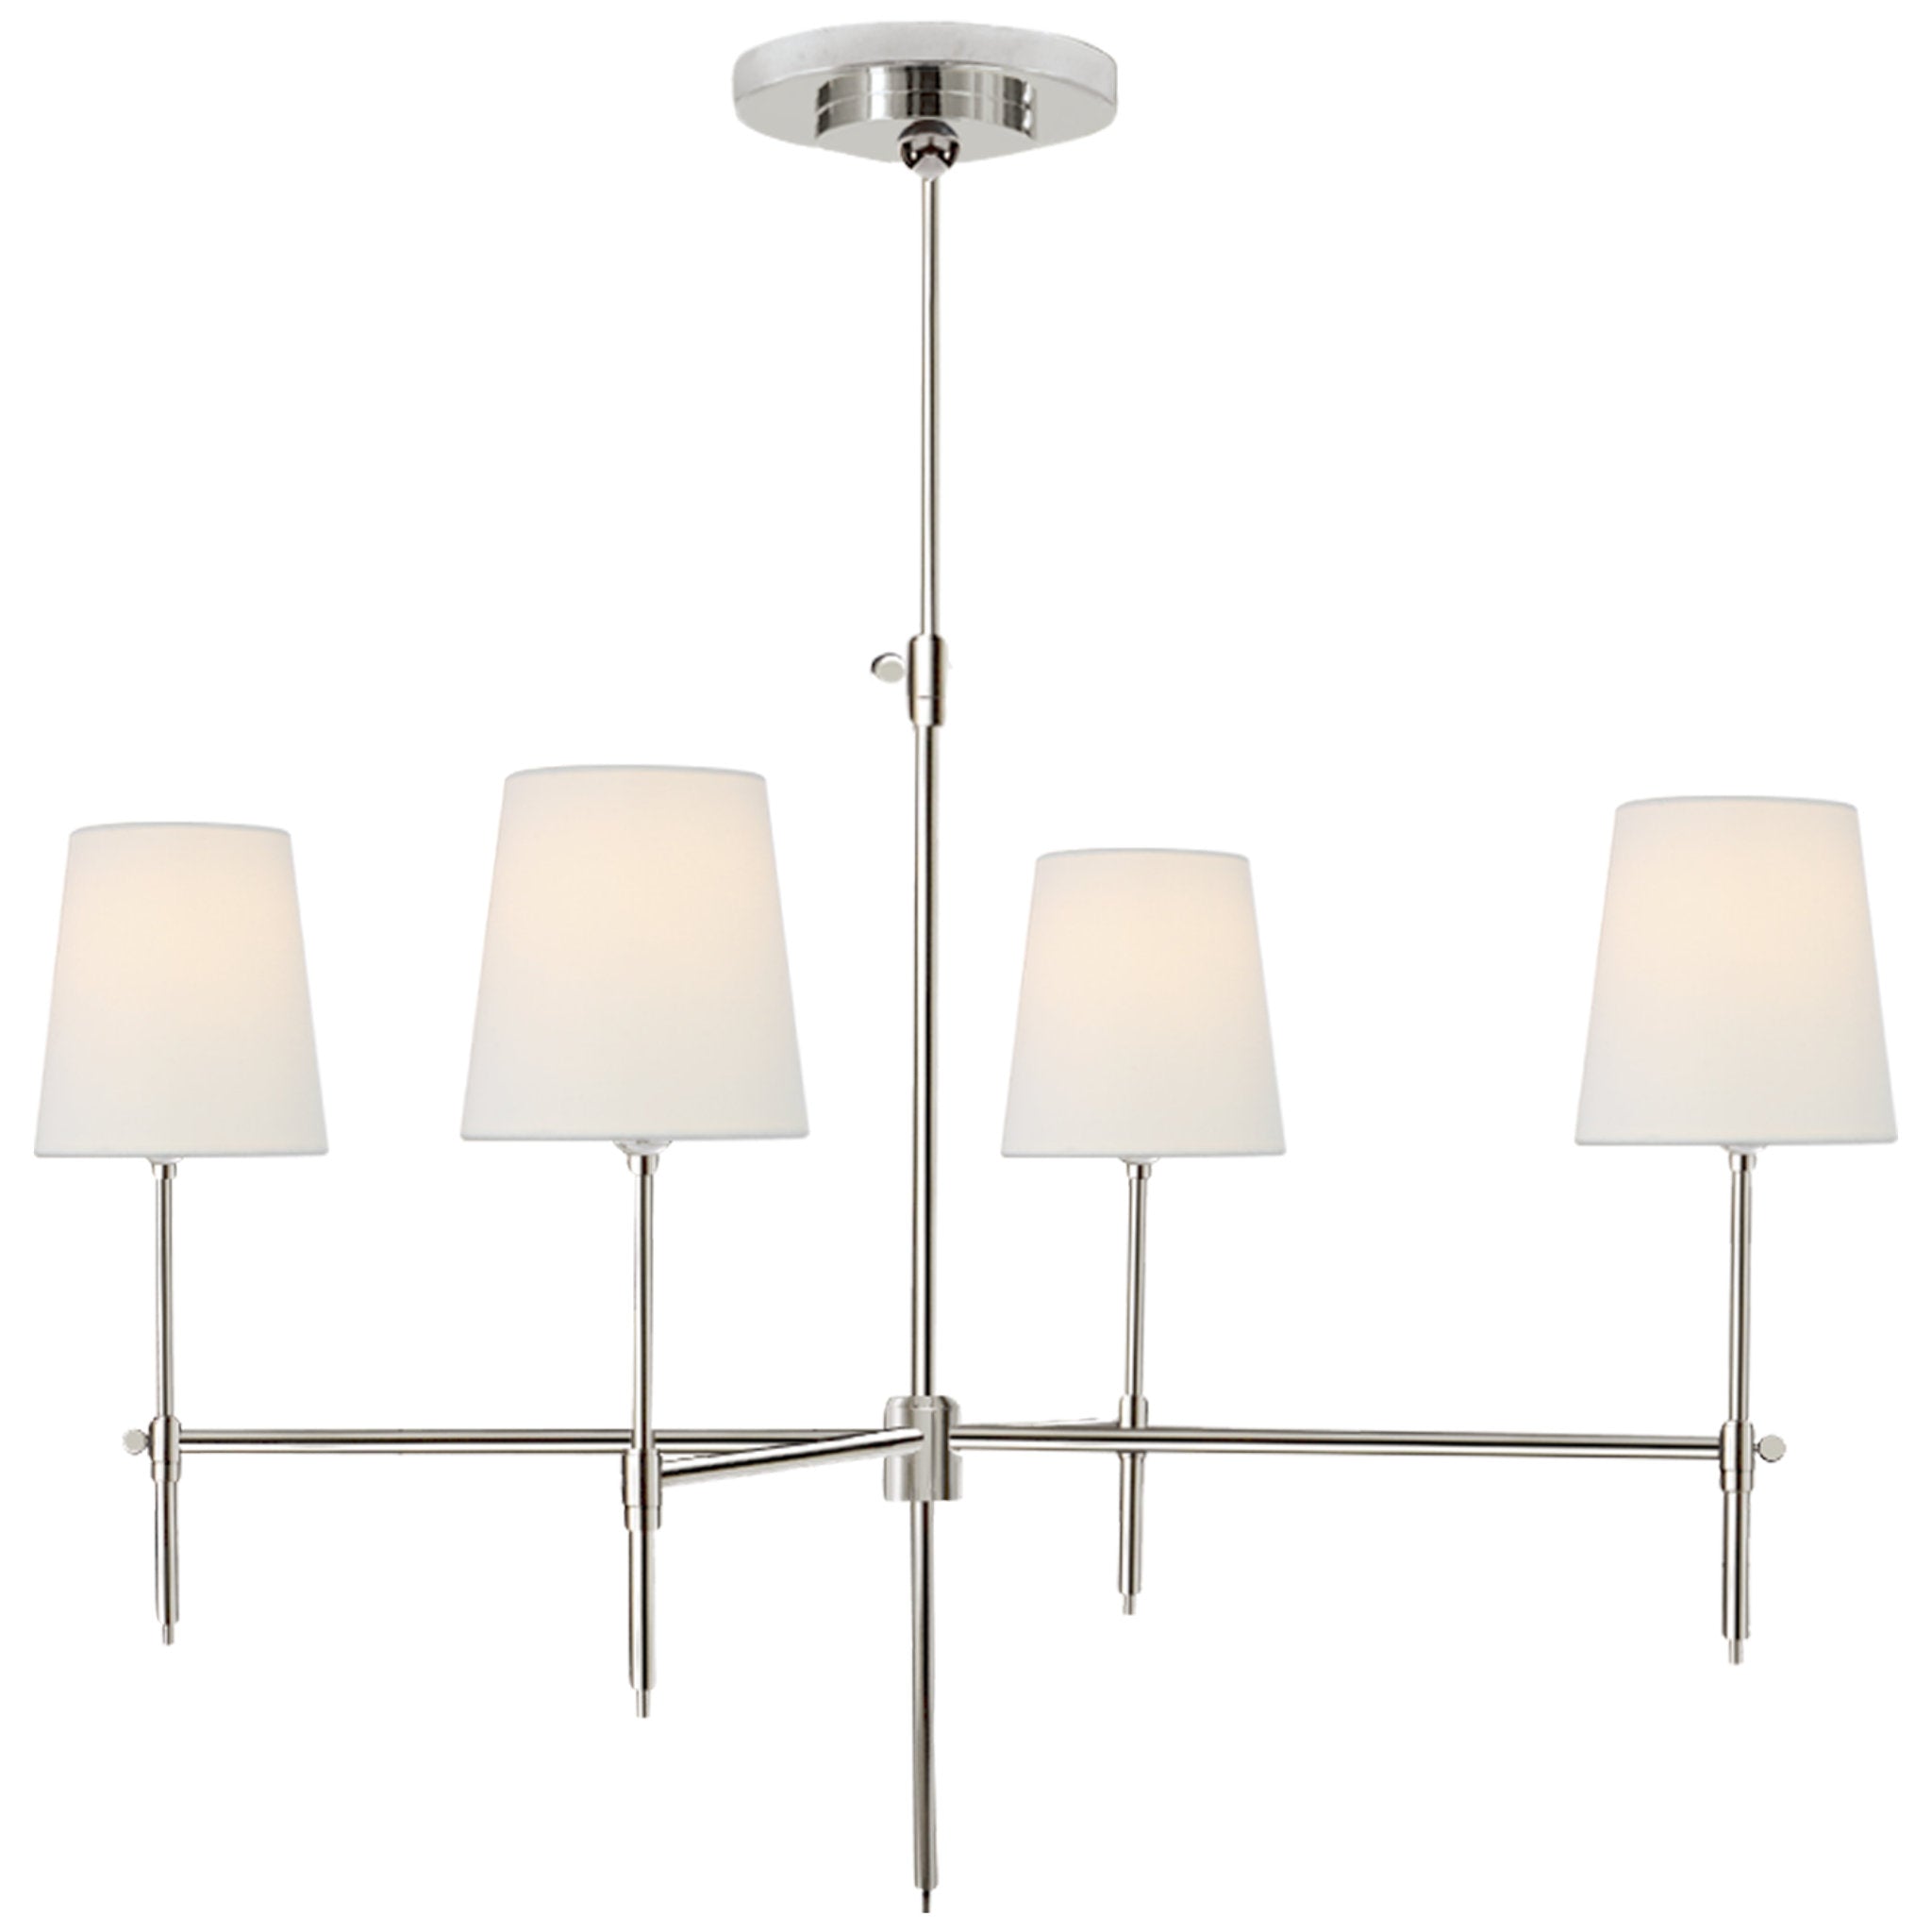 Thomas O'Brien Bryant Large Chandelier in Polished Nickel with Linen Shades